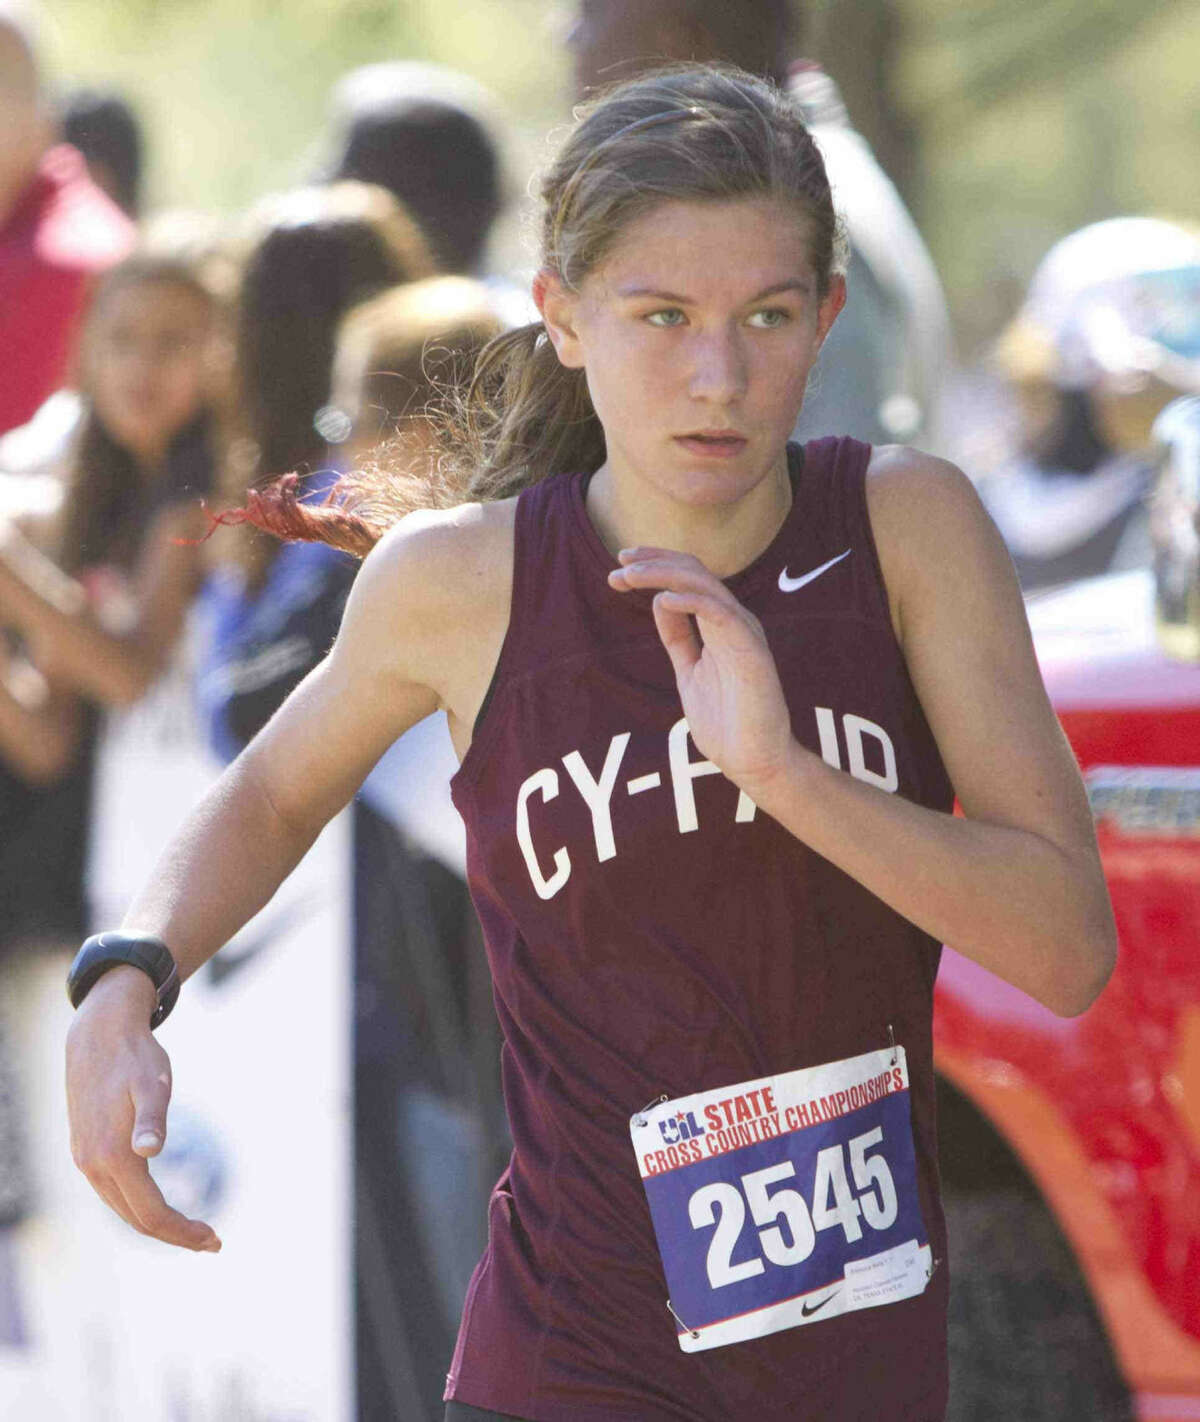 Cy0Fair's Rebecca Bonta competes in the UIL State Cross Country Championships in Round Rock Saturday. To view or purchase this photo and others like it, visit HCNpics.com.